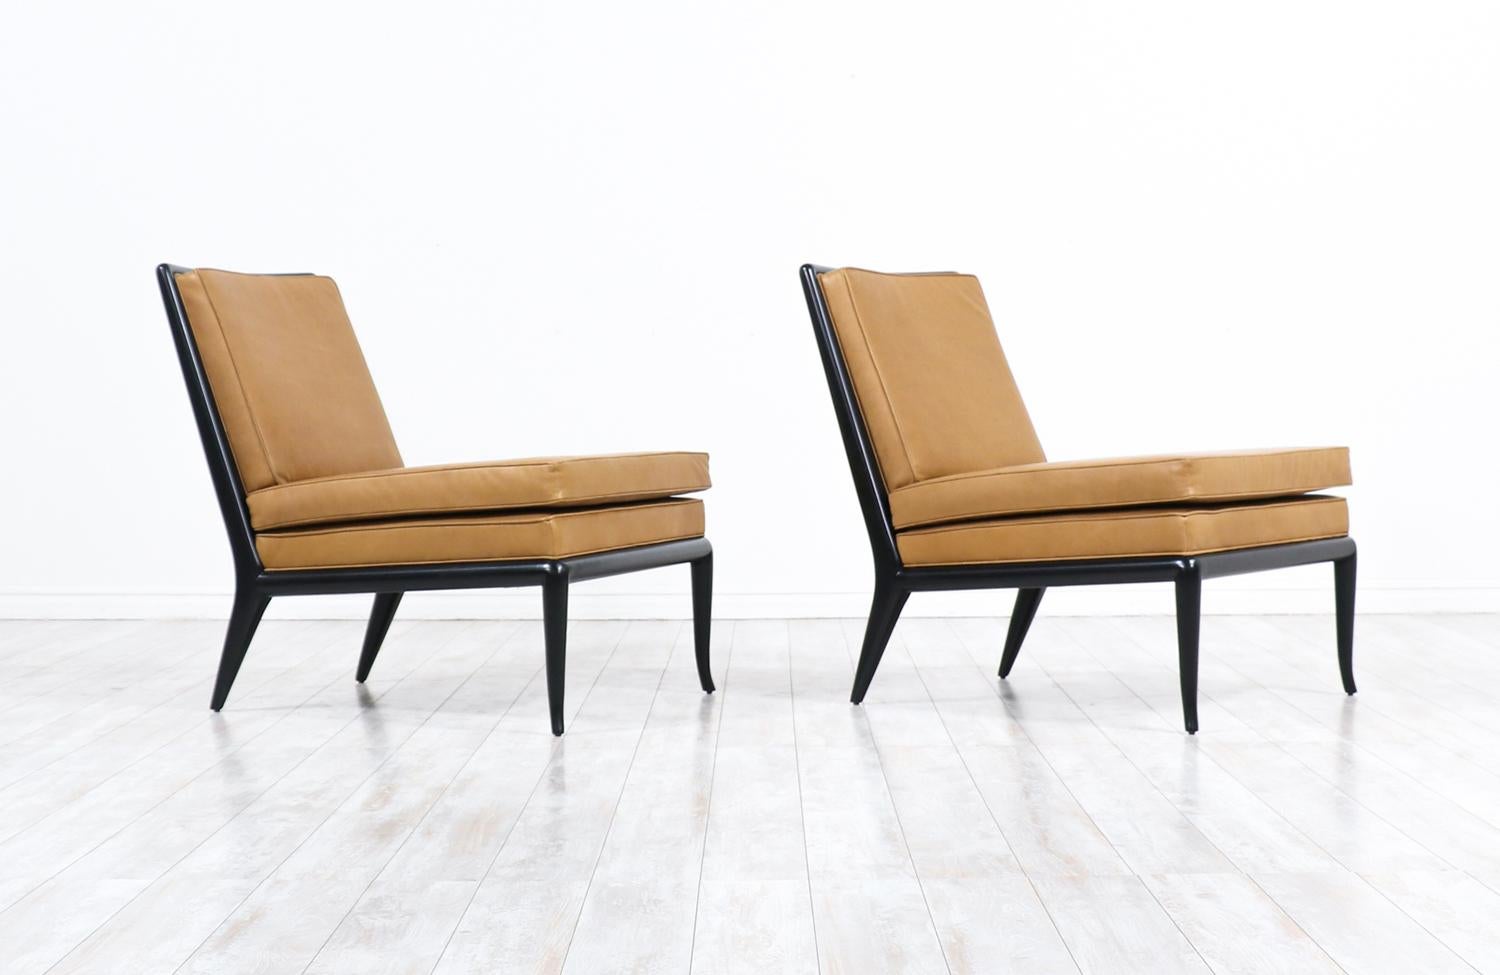 T.H. Robsjohn-Gibbings leather and ebonized wood slipper lounge chairs for Widdicomb.

Introducing the T.H. Robsjohn-Gibbings Leather & Ebonized Wood Slipper Lounge Chairs for Widdicomb, a vintage gem exuding timeless grace. Crafted in the 1950s in